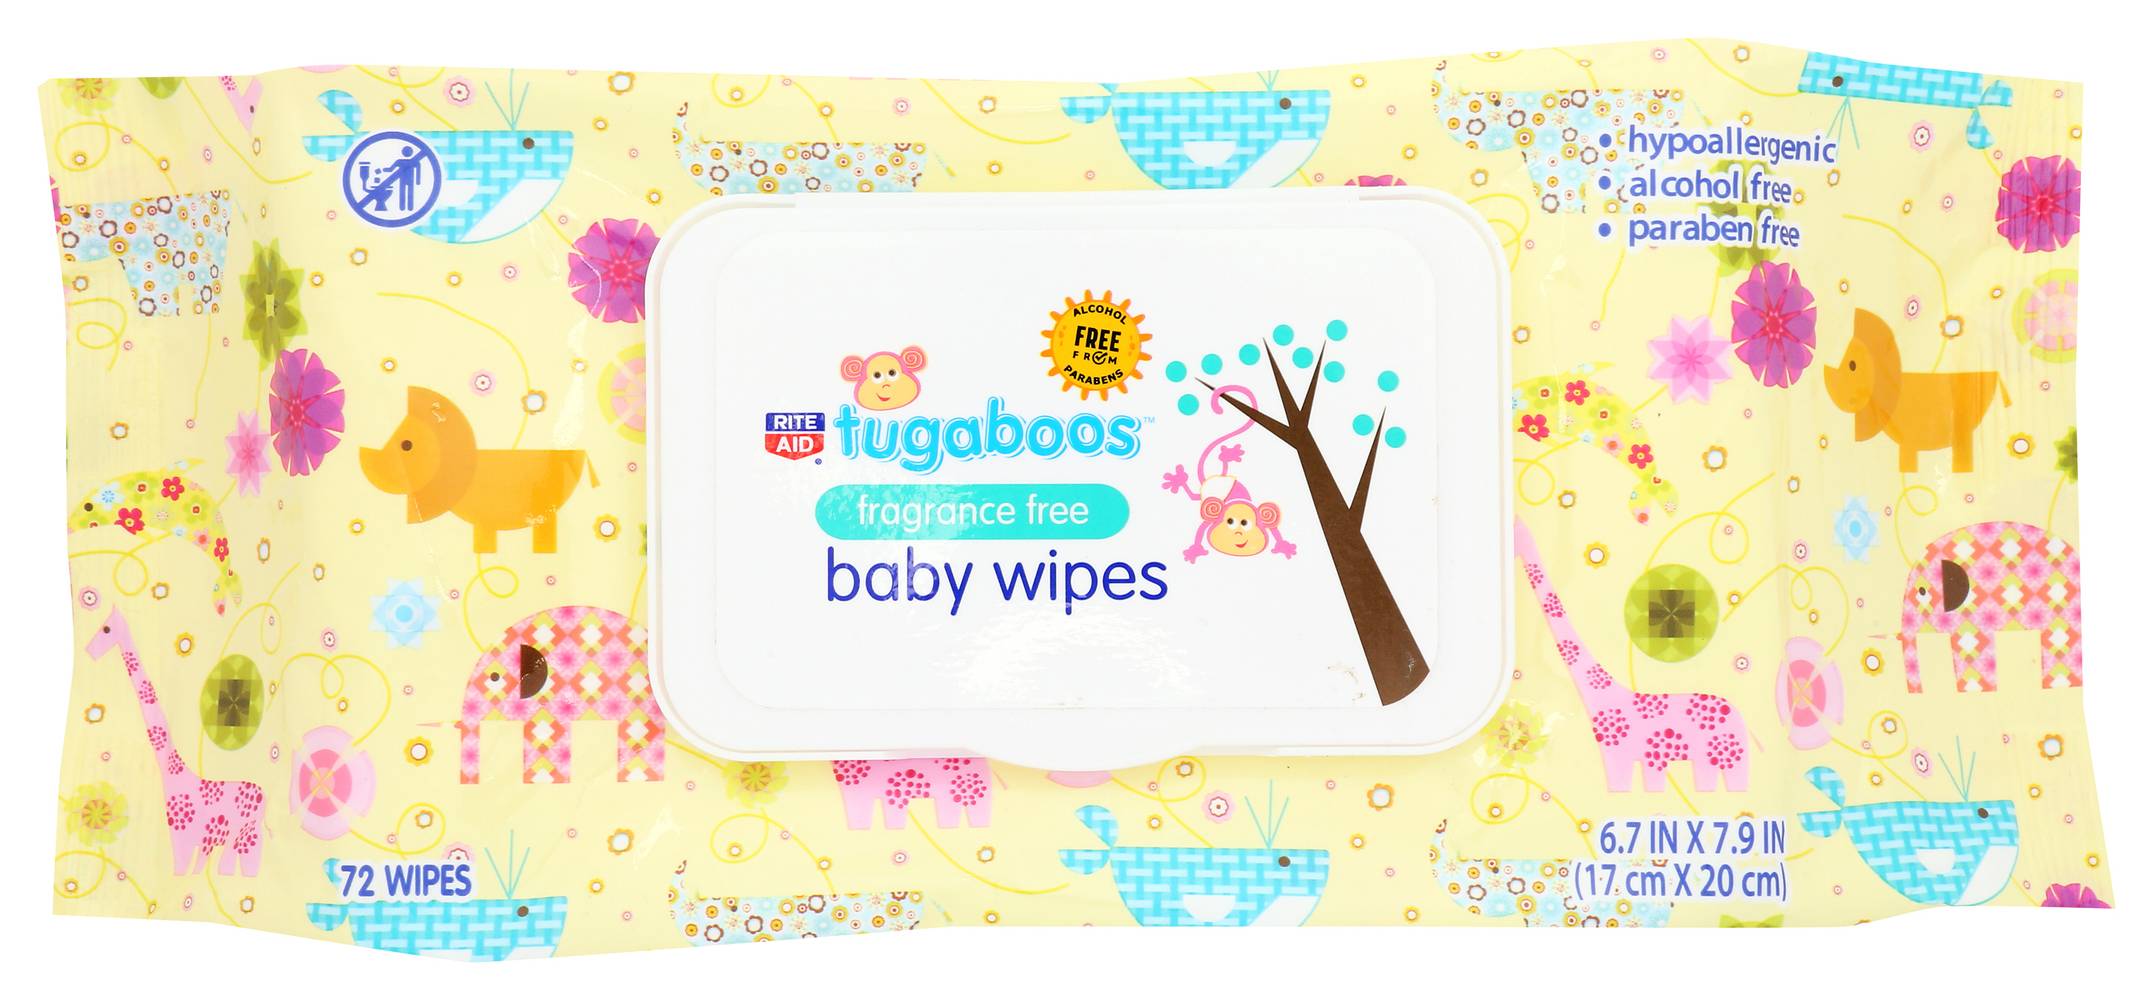 Tugaboos Baby Wipes Fragance Free 72 Wipes (1 ct)